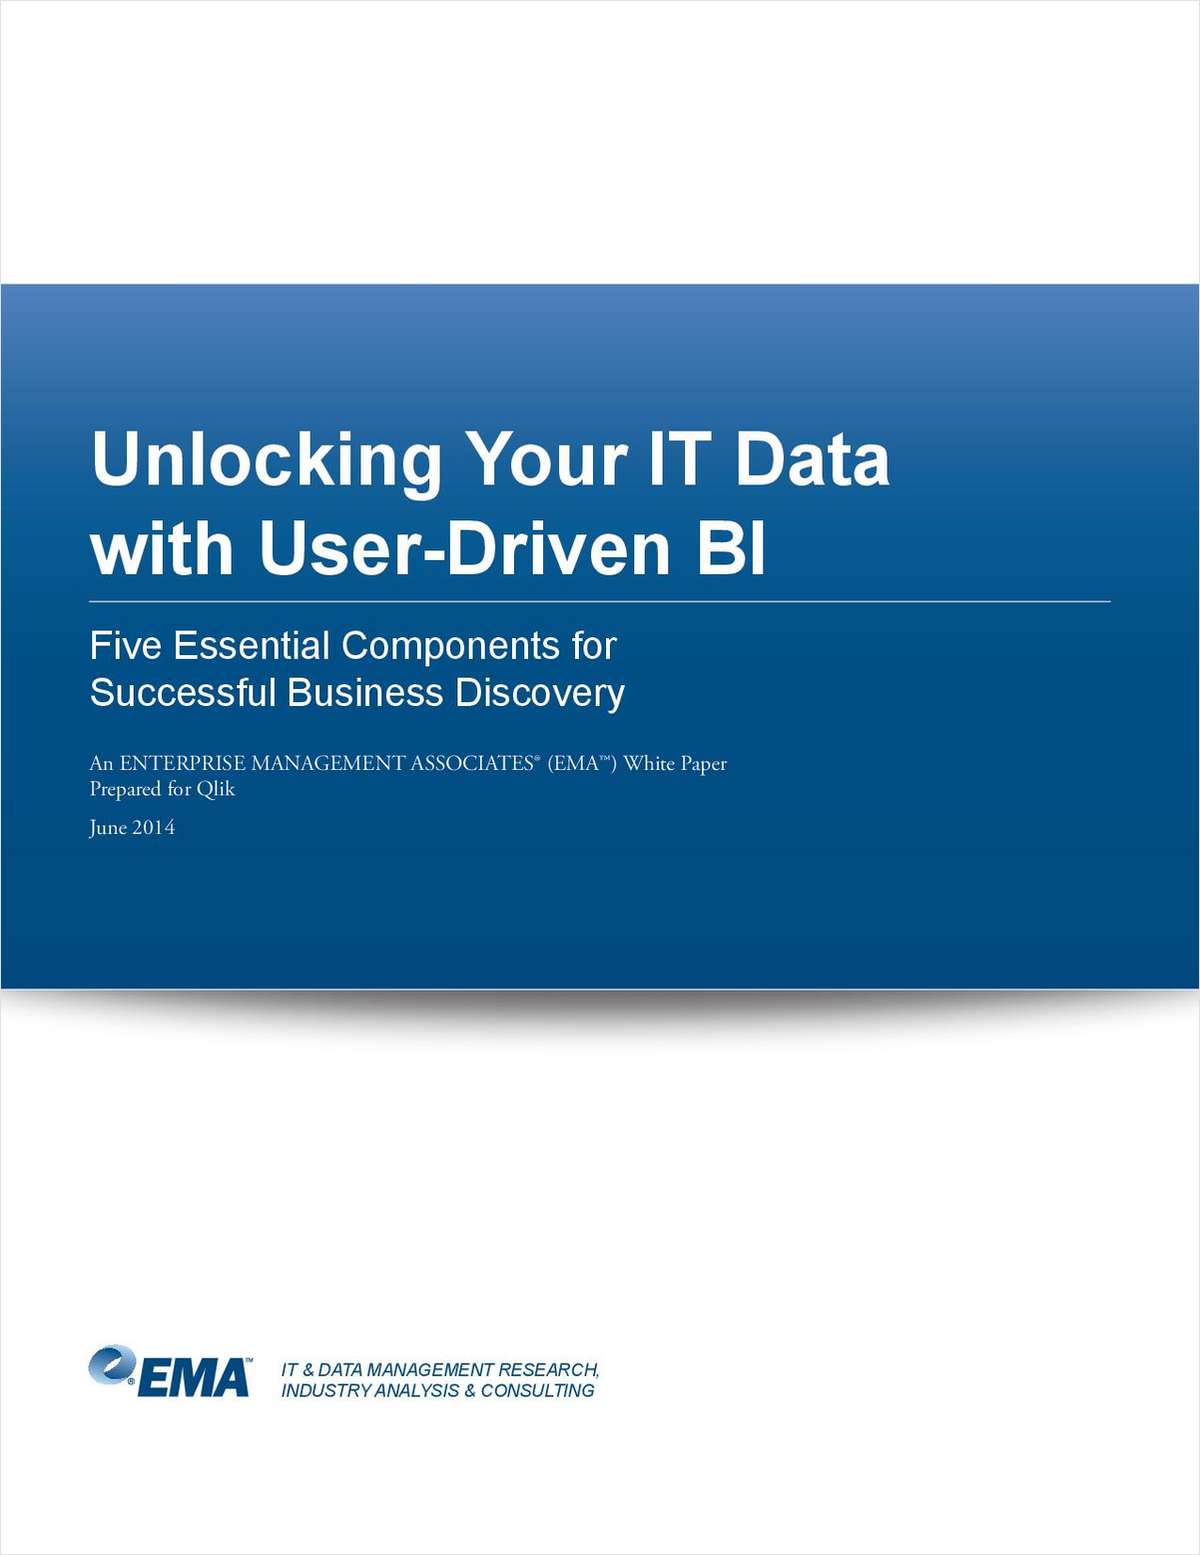 Unlocking Your IT Data with User-Driven BI